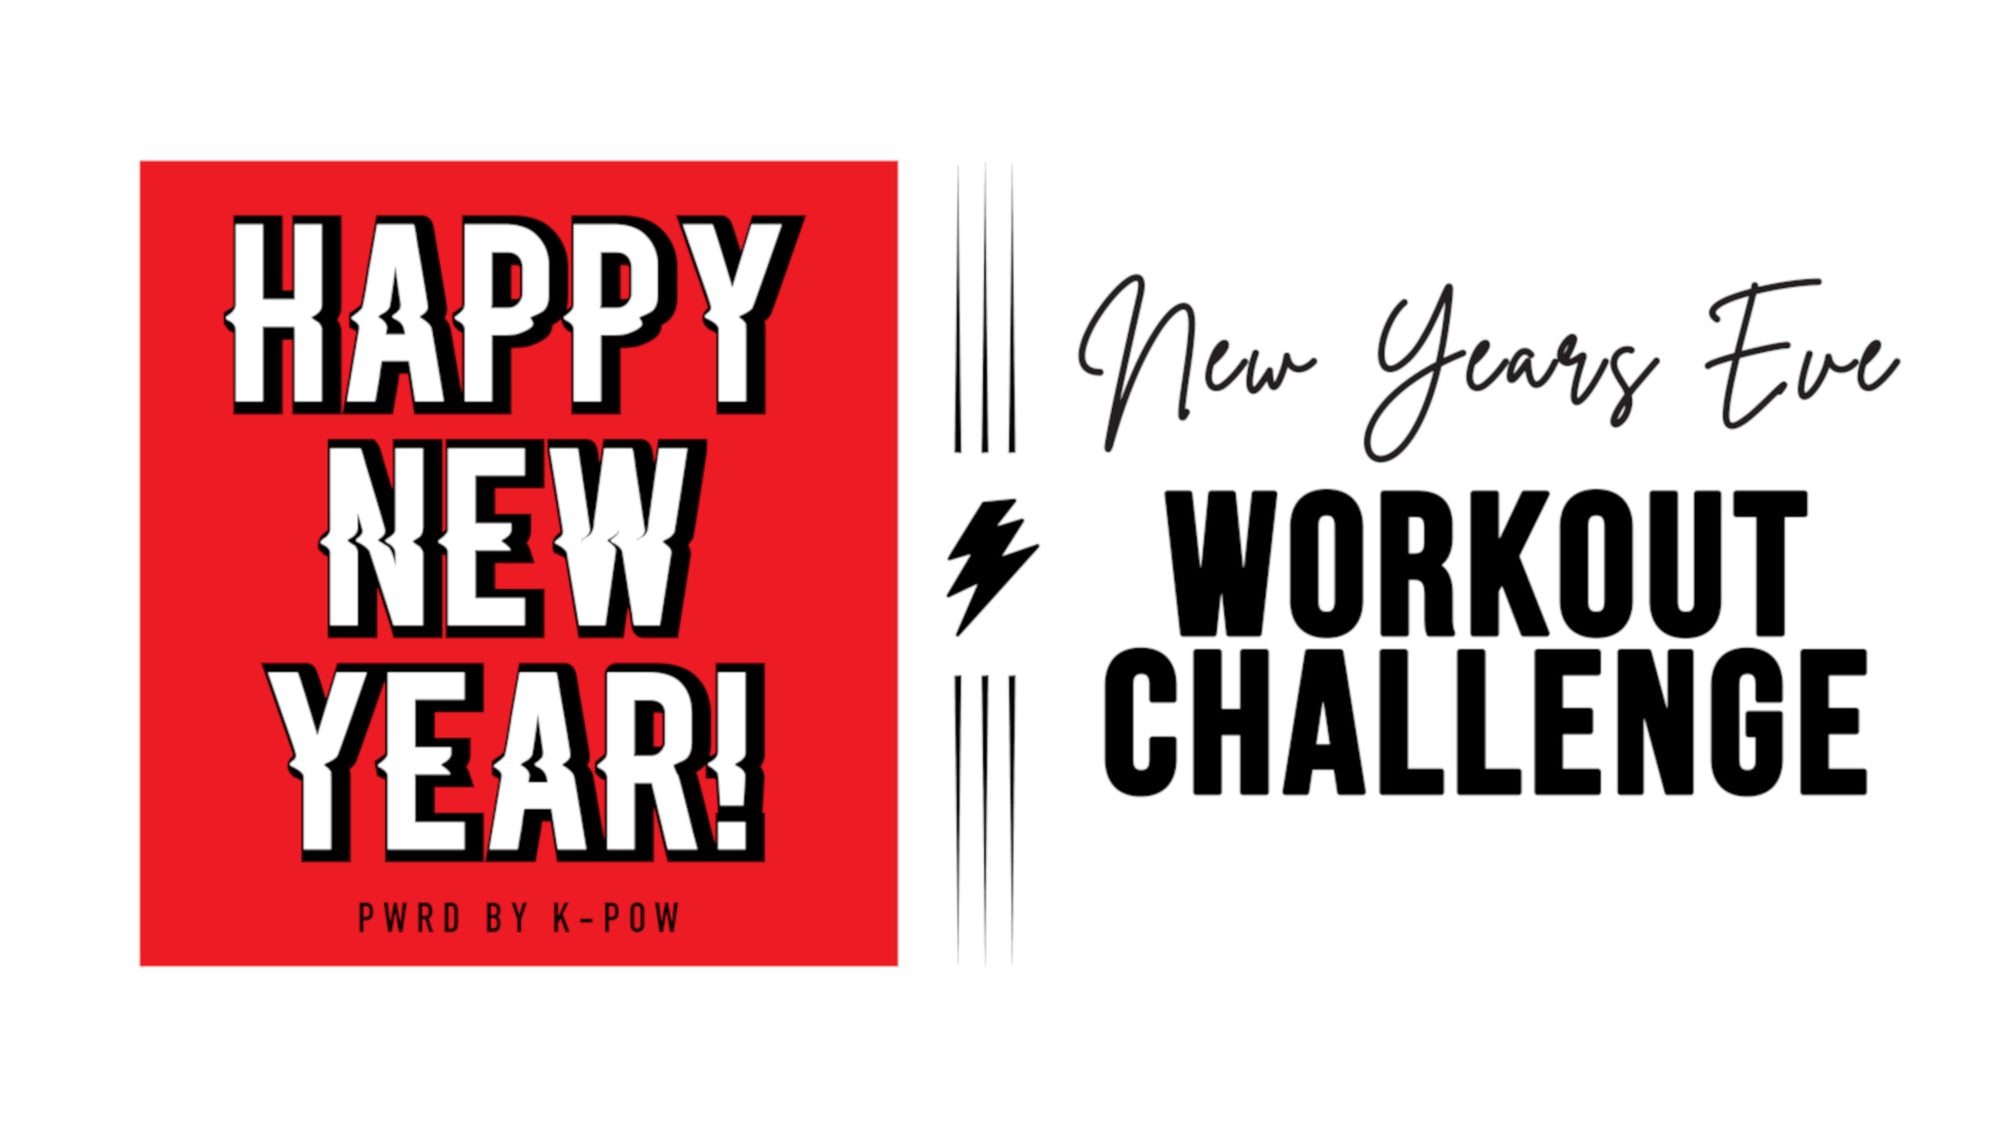 New Year's Eve Workout Challenge